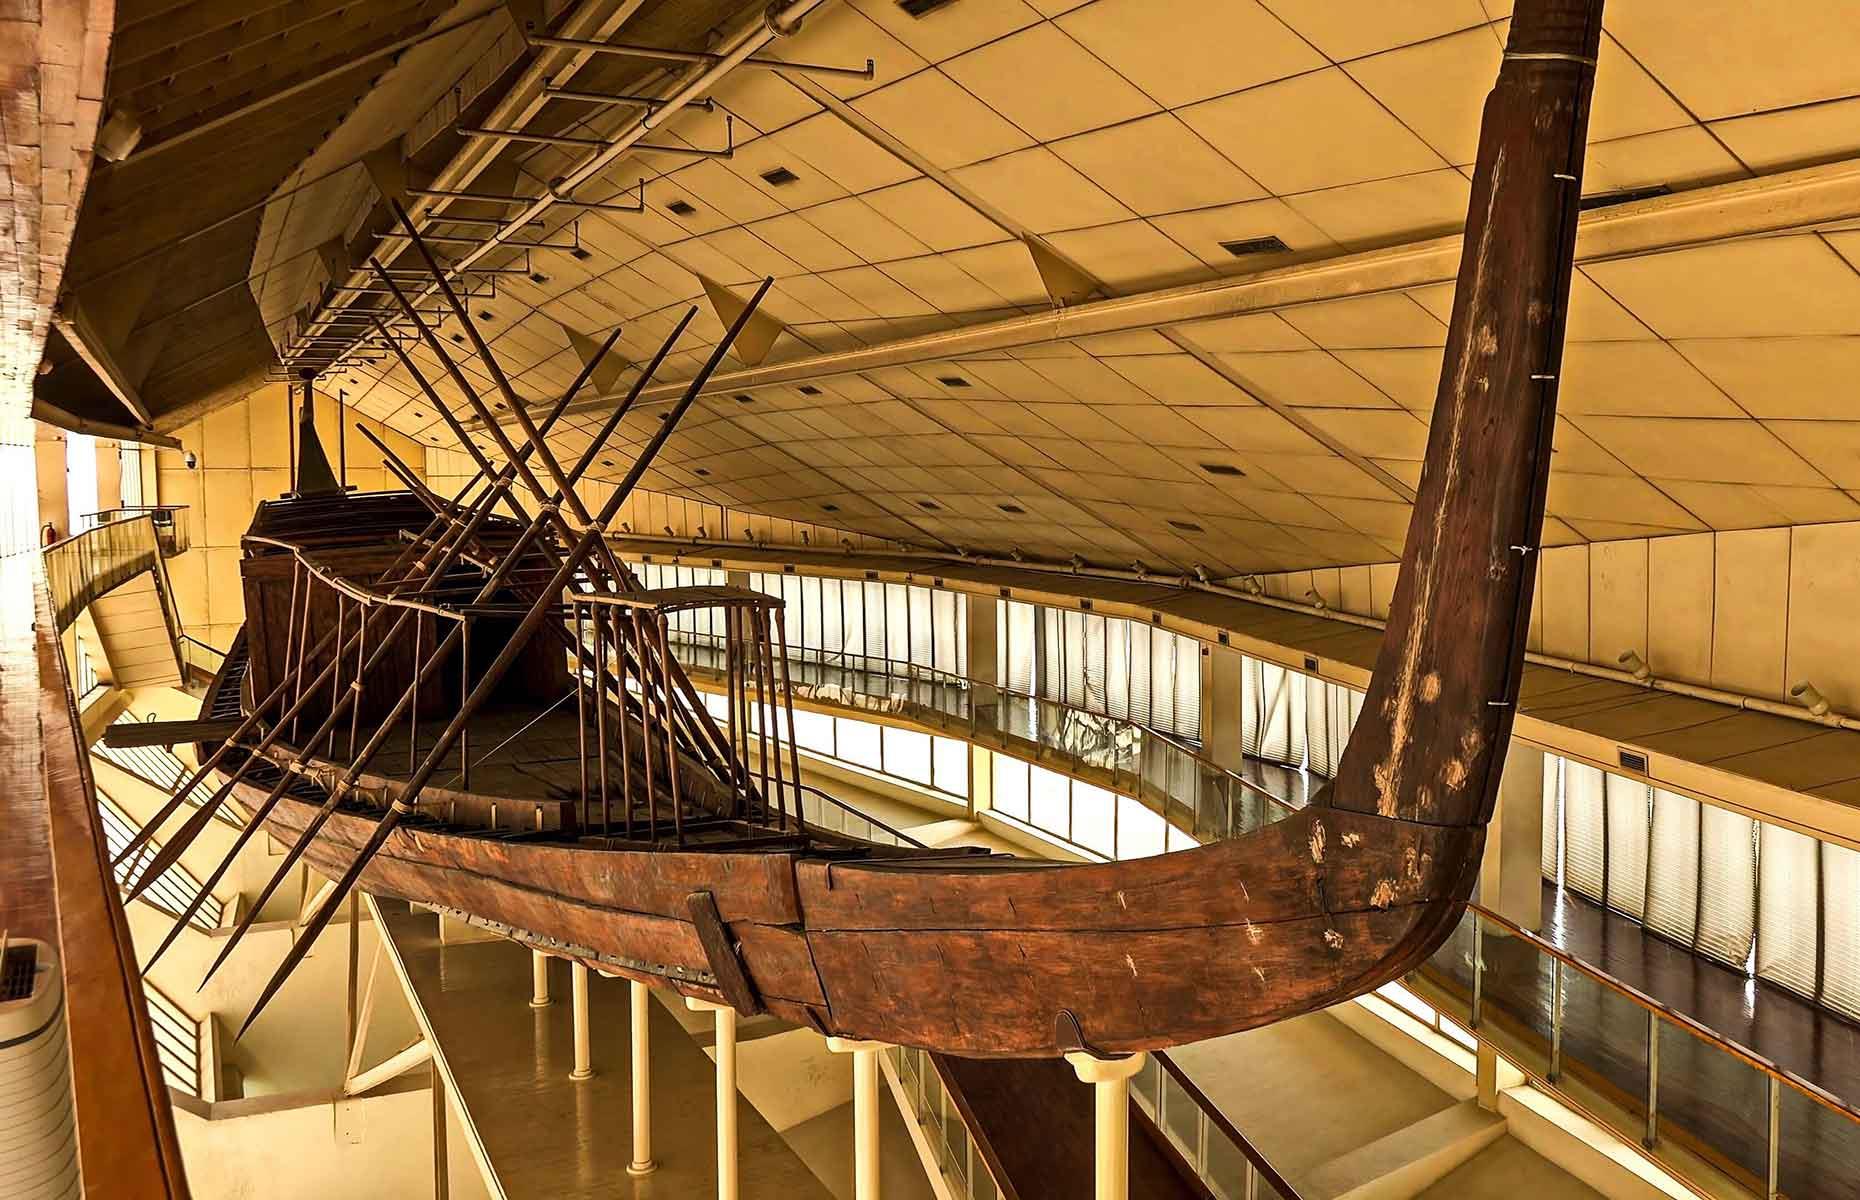 <p>In 1954, a dismantled wooden ship was discovered buried next to the pyramid – a common inclusion as ancient Egyptians believed these vessels would transport their kings to the afterlife. As the pharaoh was believed to be the earthly representation of Ra, the sun god, they were called solar boats. Until 2021, Khufu's ship was housed in its very own Solar Boat Museum, not far from where it was first discovered, but it has now been moved to the new Grand Egyptian Museum, set to open to the public in late-spring 2024.</p>  <p><a href="http://bit.ly/3roL4wv"><strong>Love this? Follow our Facebook page to learn about more ancient discoveries</strong></a></p>